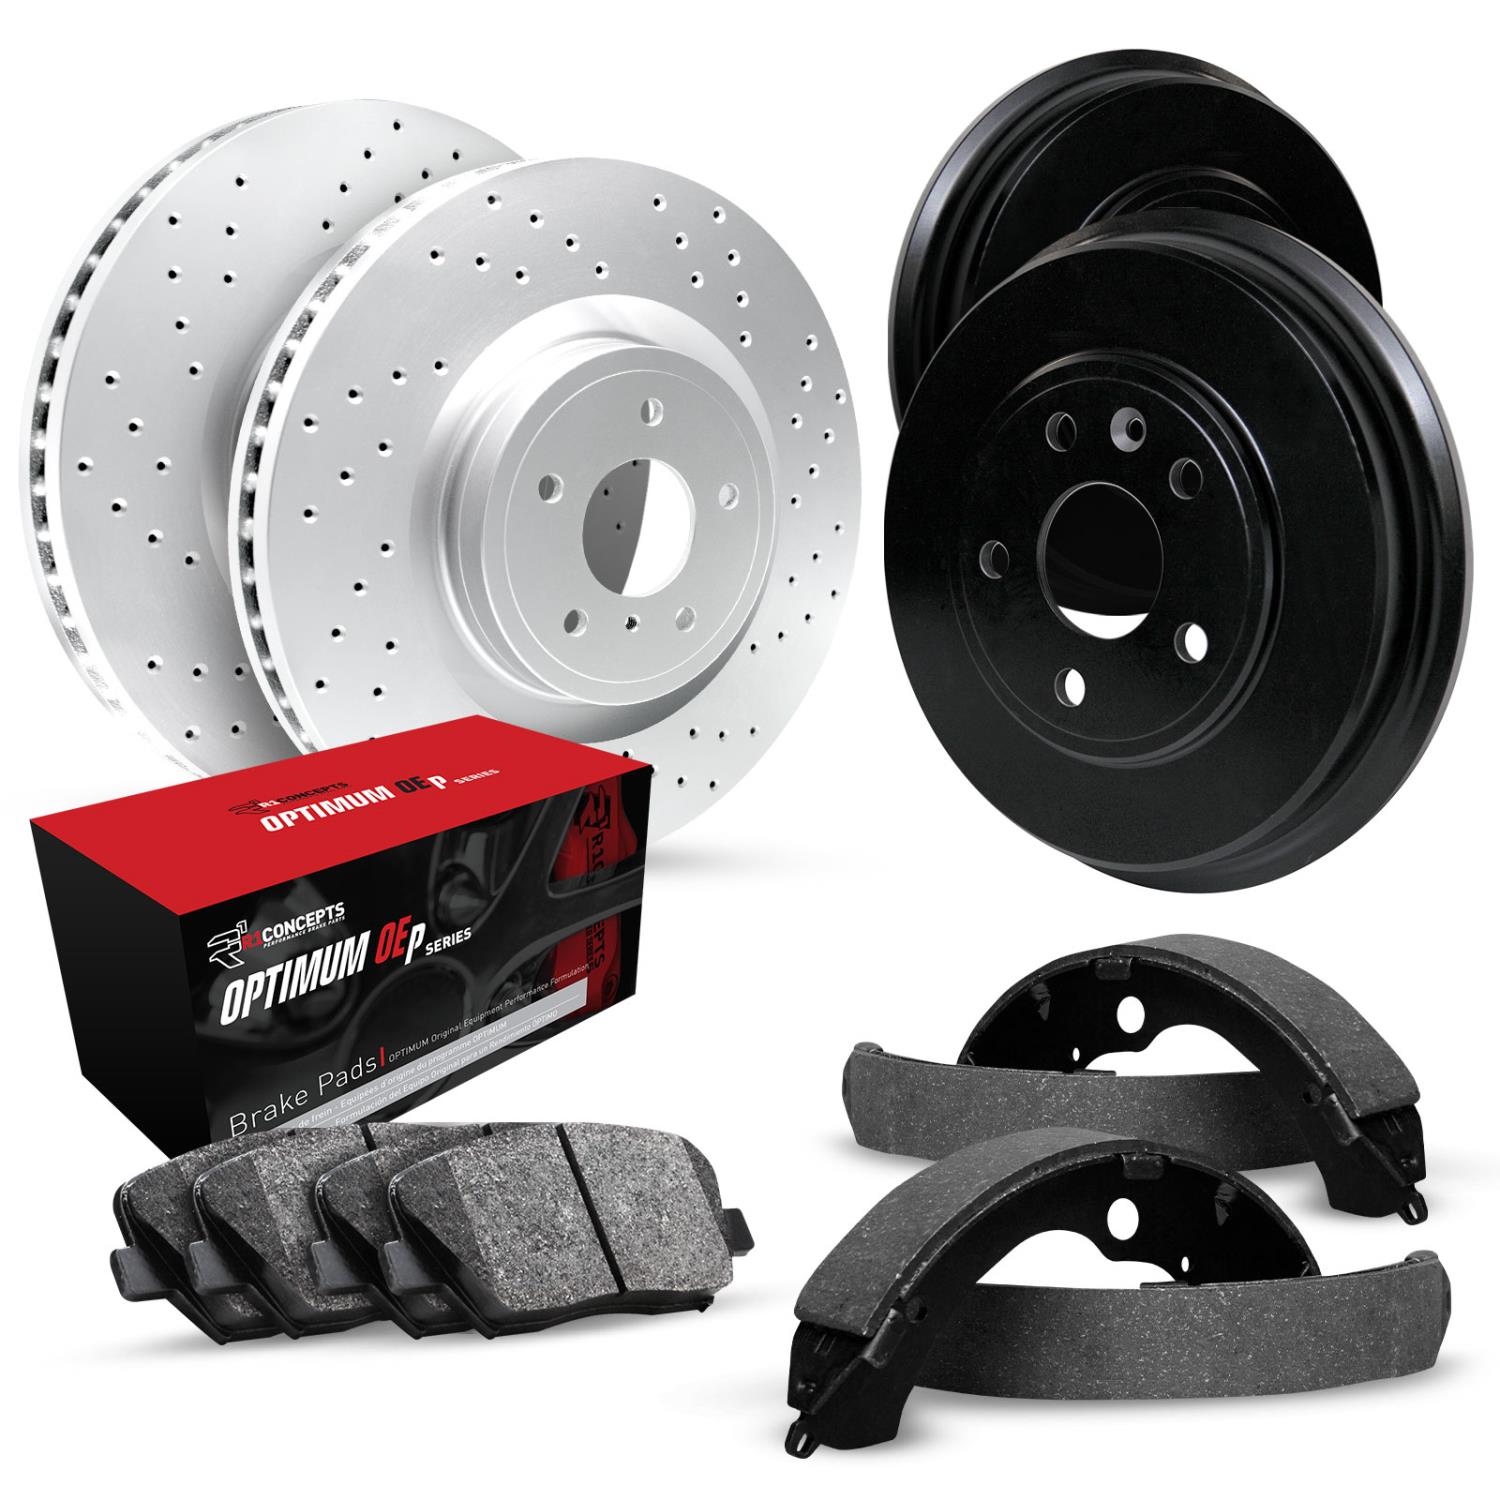 GEO-Carbon Drilled Brake Rotor & Drum Set w/Optimum OE Pads & Shoes, 1985-1989 Infiniti/Nissan, Position: Front & Rear